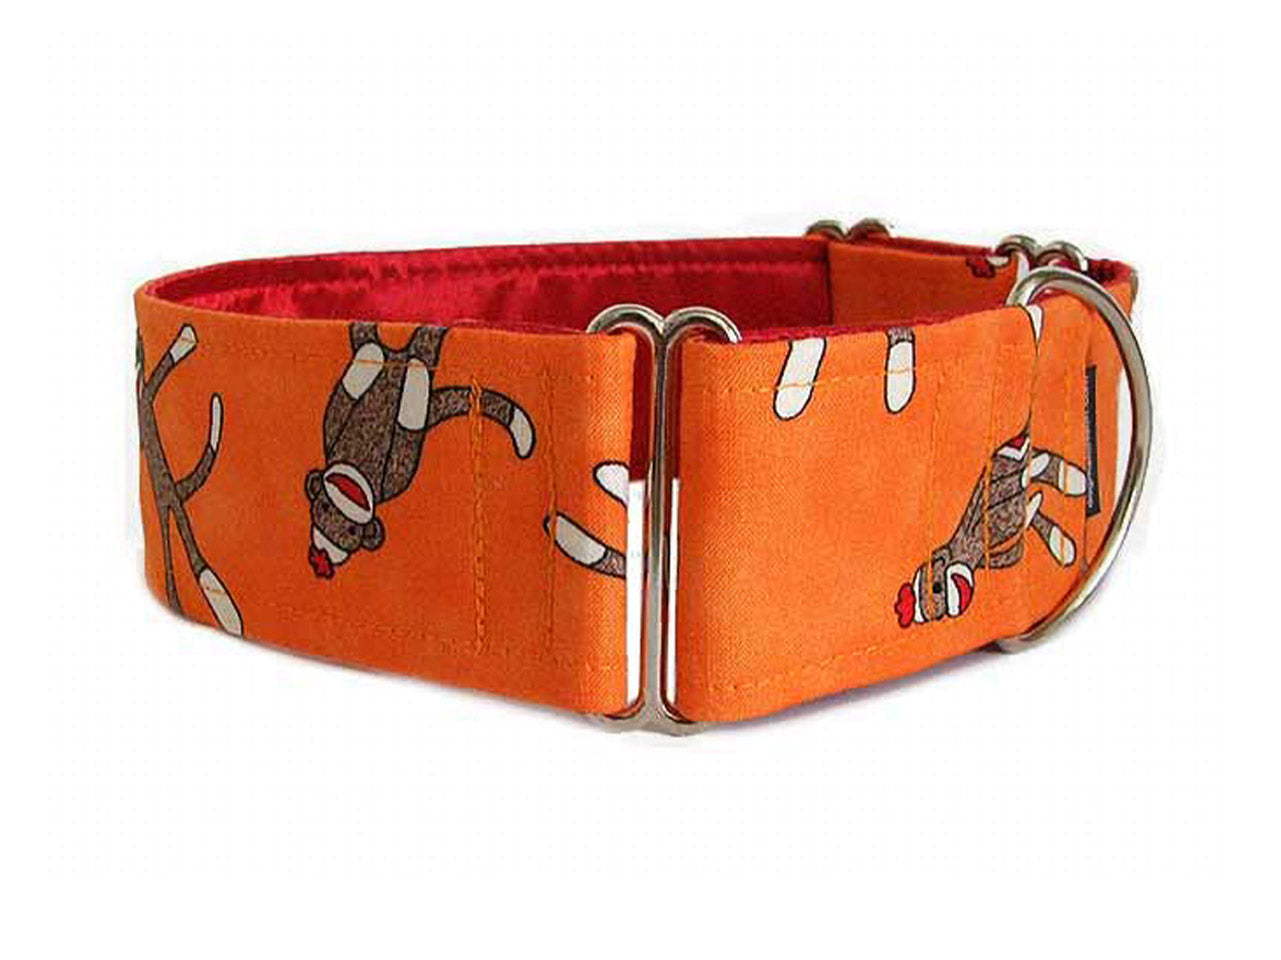 These cute sock monkeys on bright orange are sure to please any playful pooch! 